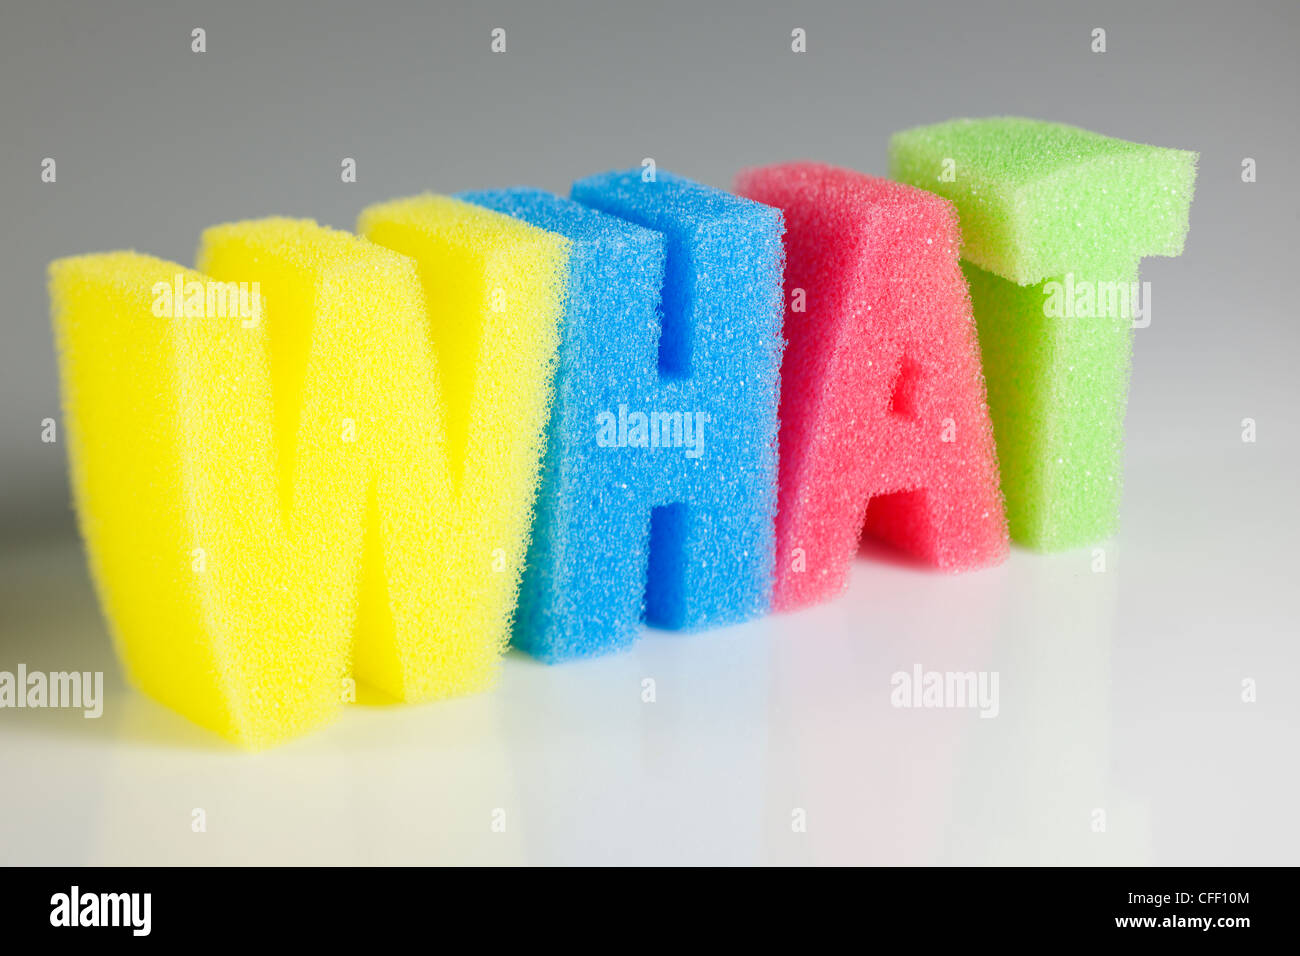 What spelled out in coloured sponge letters Stock Photo